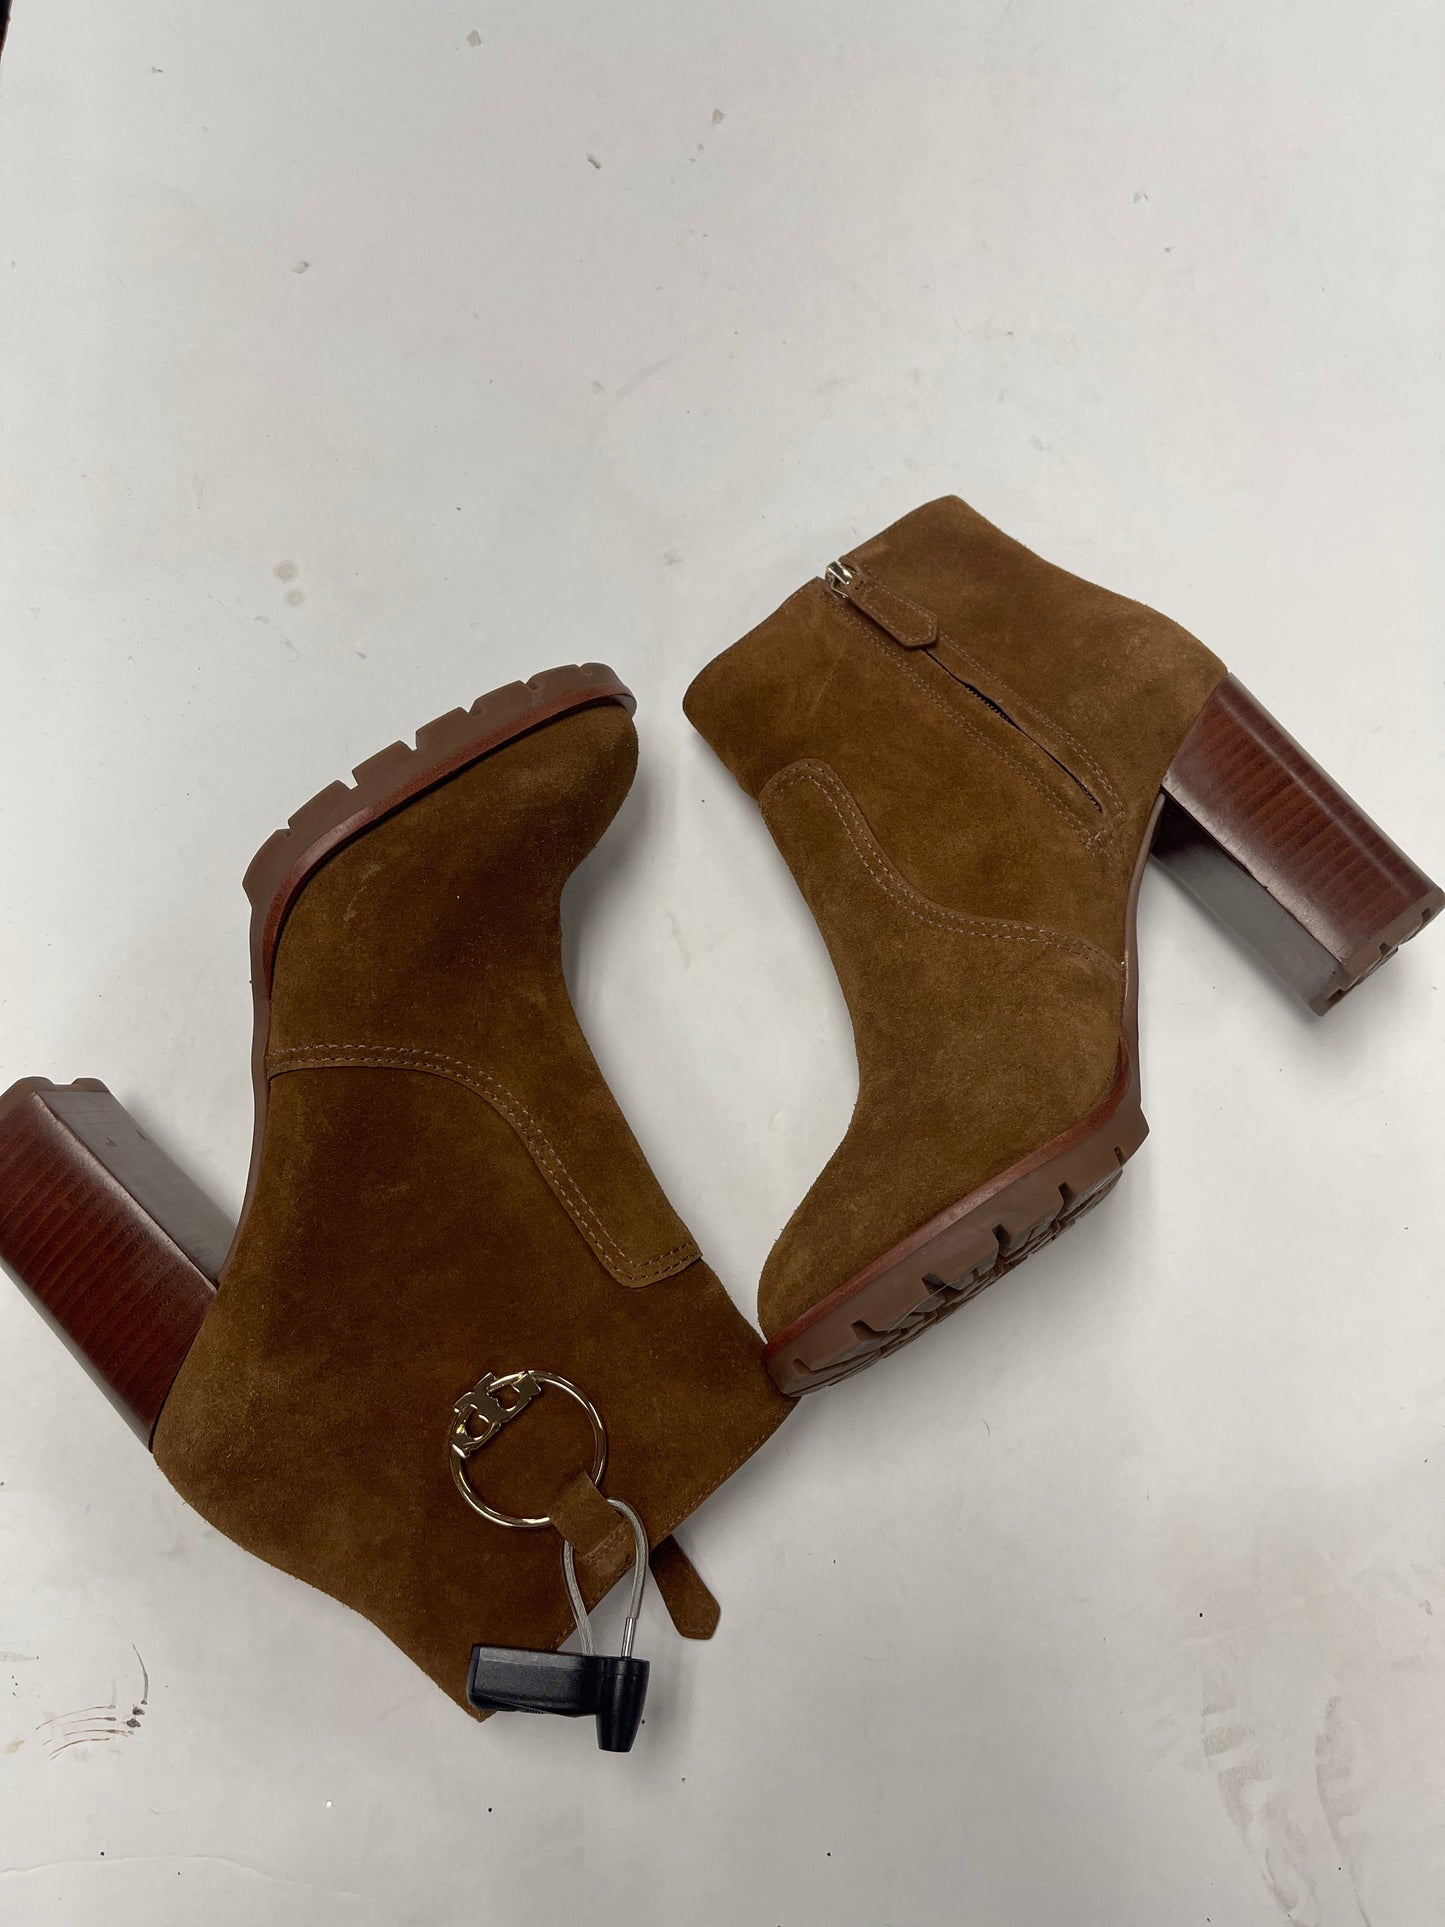 Tan Boots Ankle Heels Tory Burch, Size 8.5